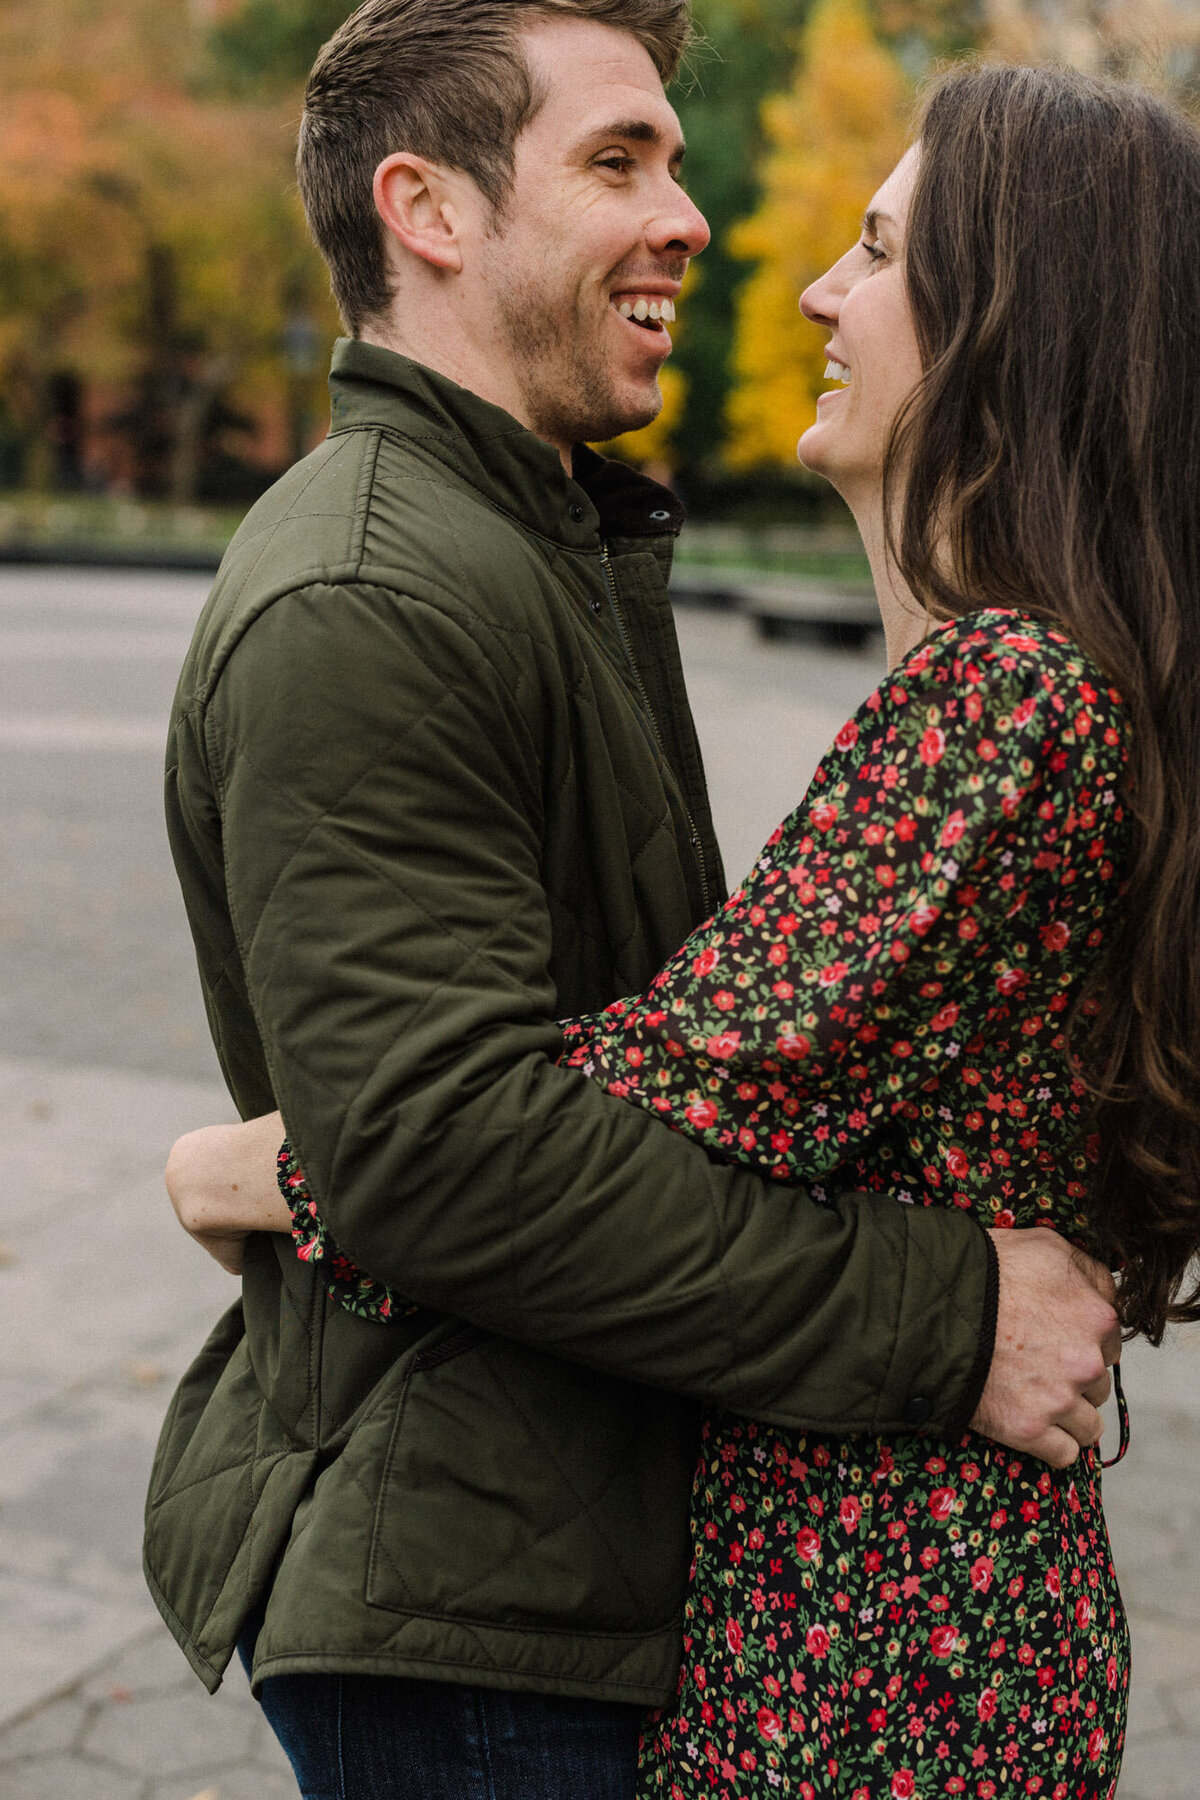 An autumn engagement photo in New York City